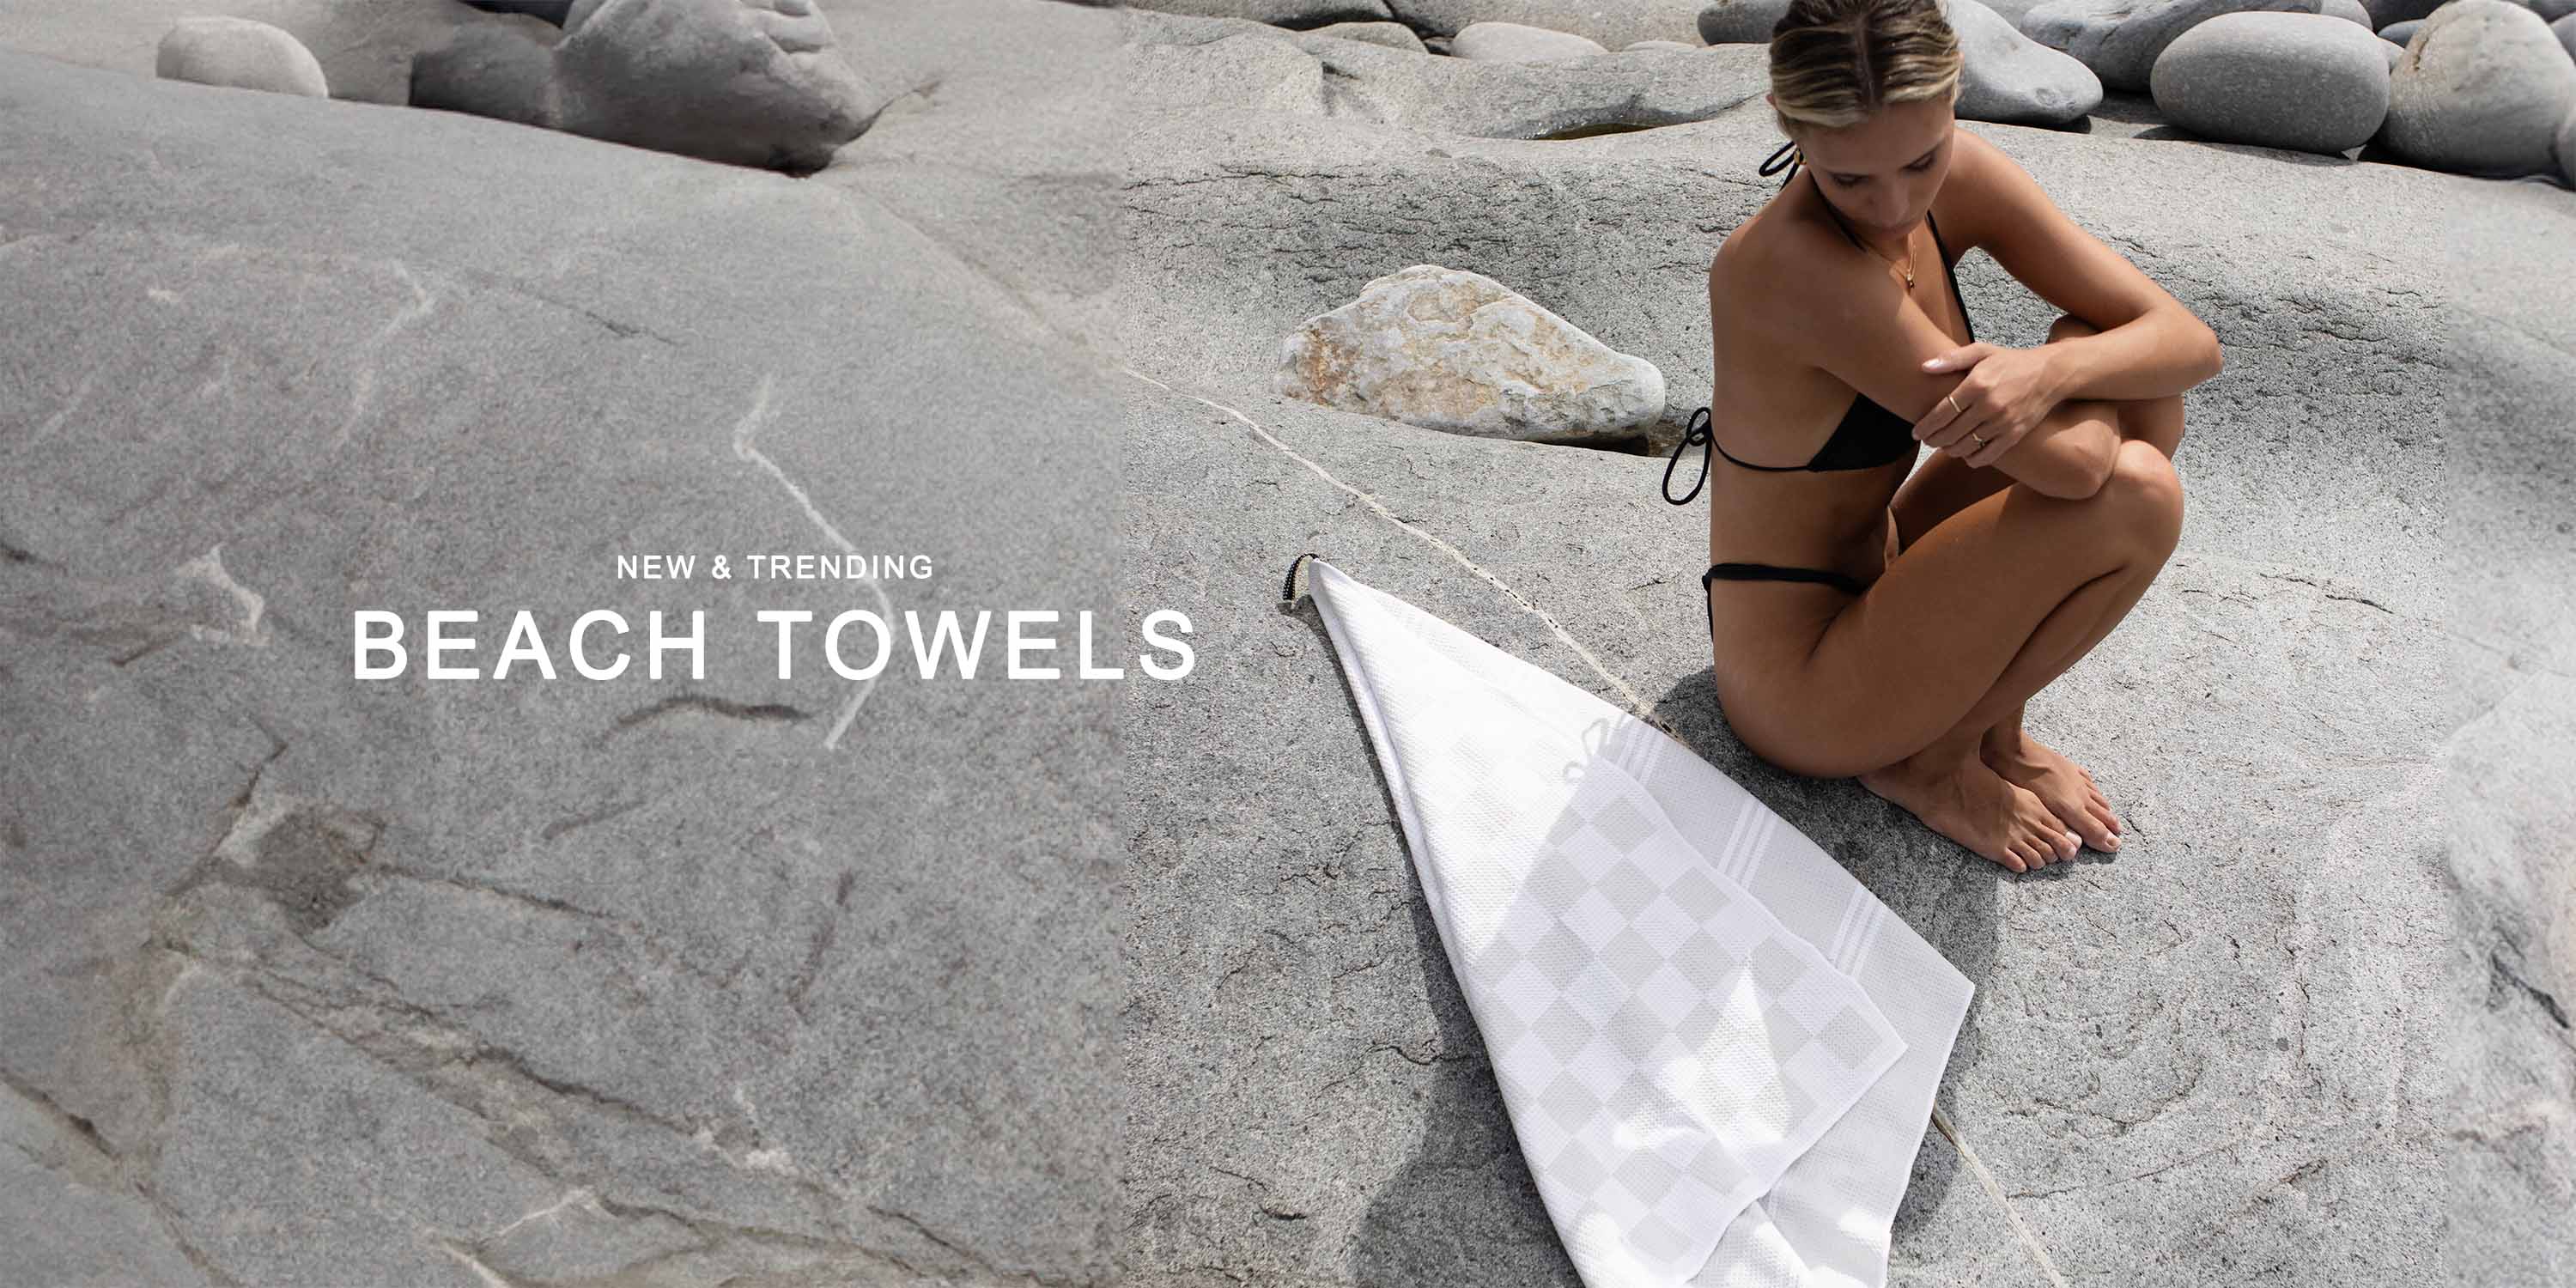 sand free beach towel - personalised beach towels - travel towels - quick dry towels - buy towels in australia - sand resistant towels - gym towels - dog towels - pet towels - premium beach towels - checkboard towels - check towel